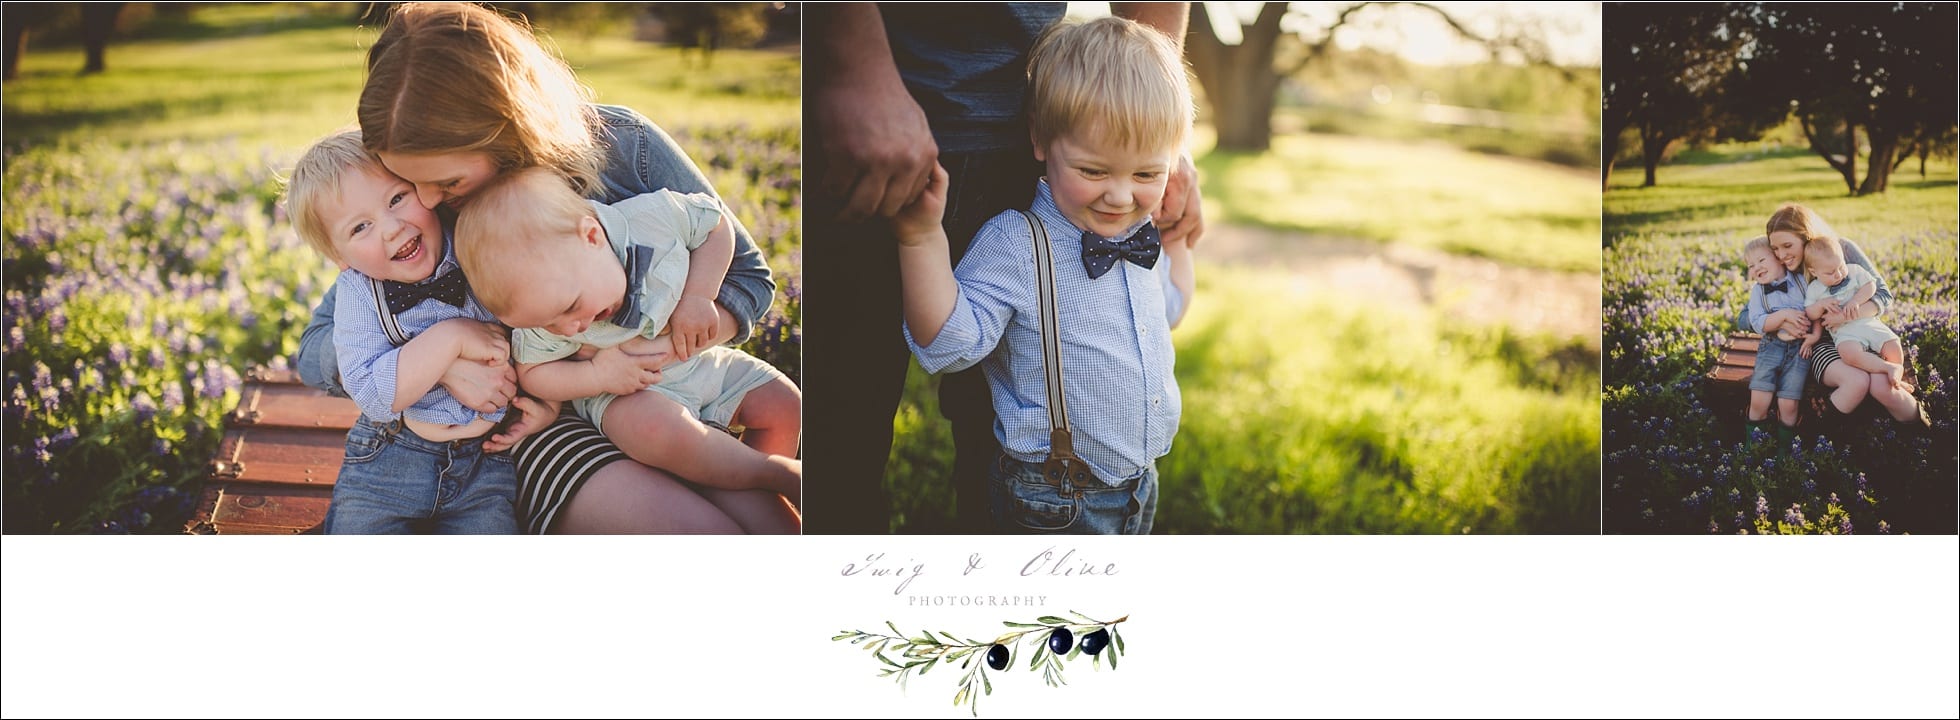 bow ties, outdoor family session, happy couples, brothers, angelic, Sun Prairie Photographers